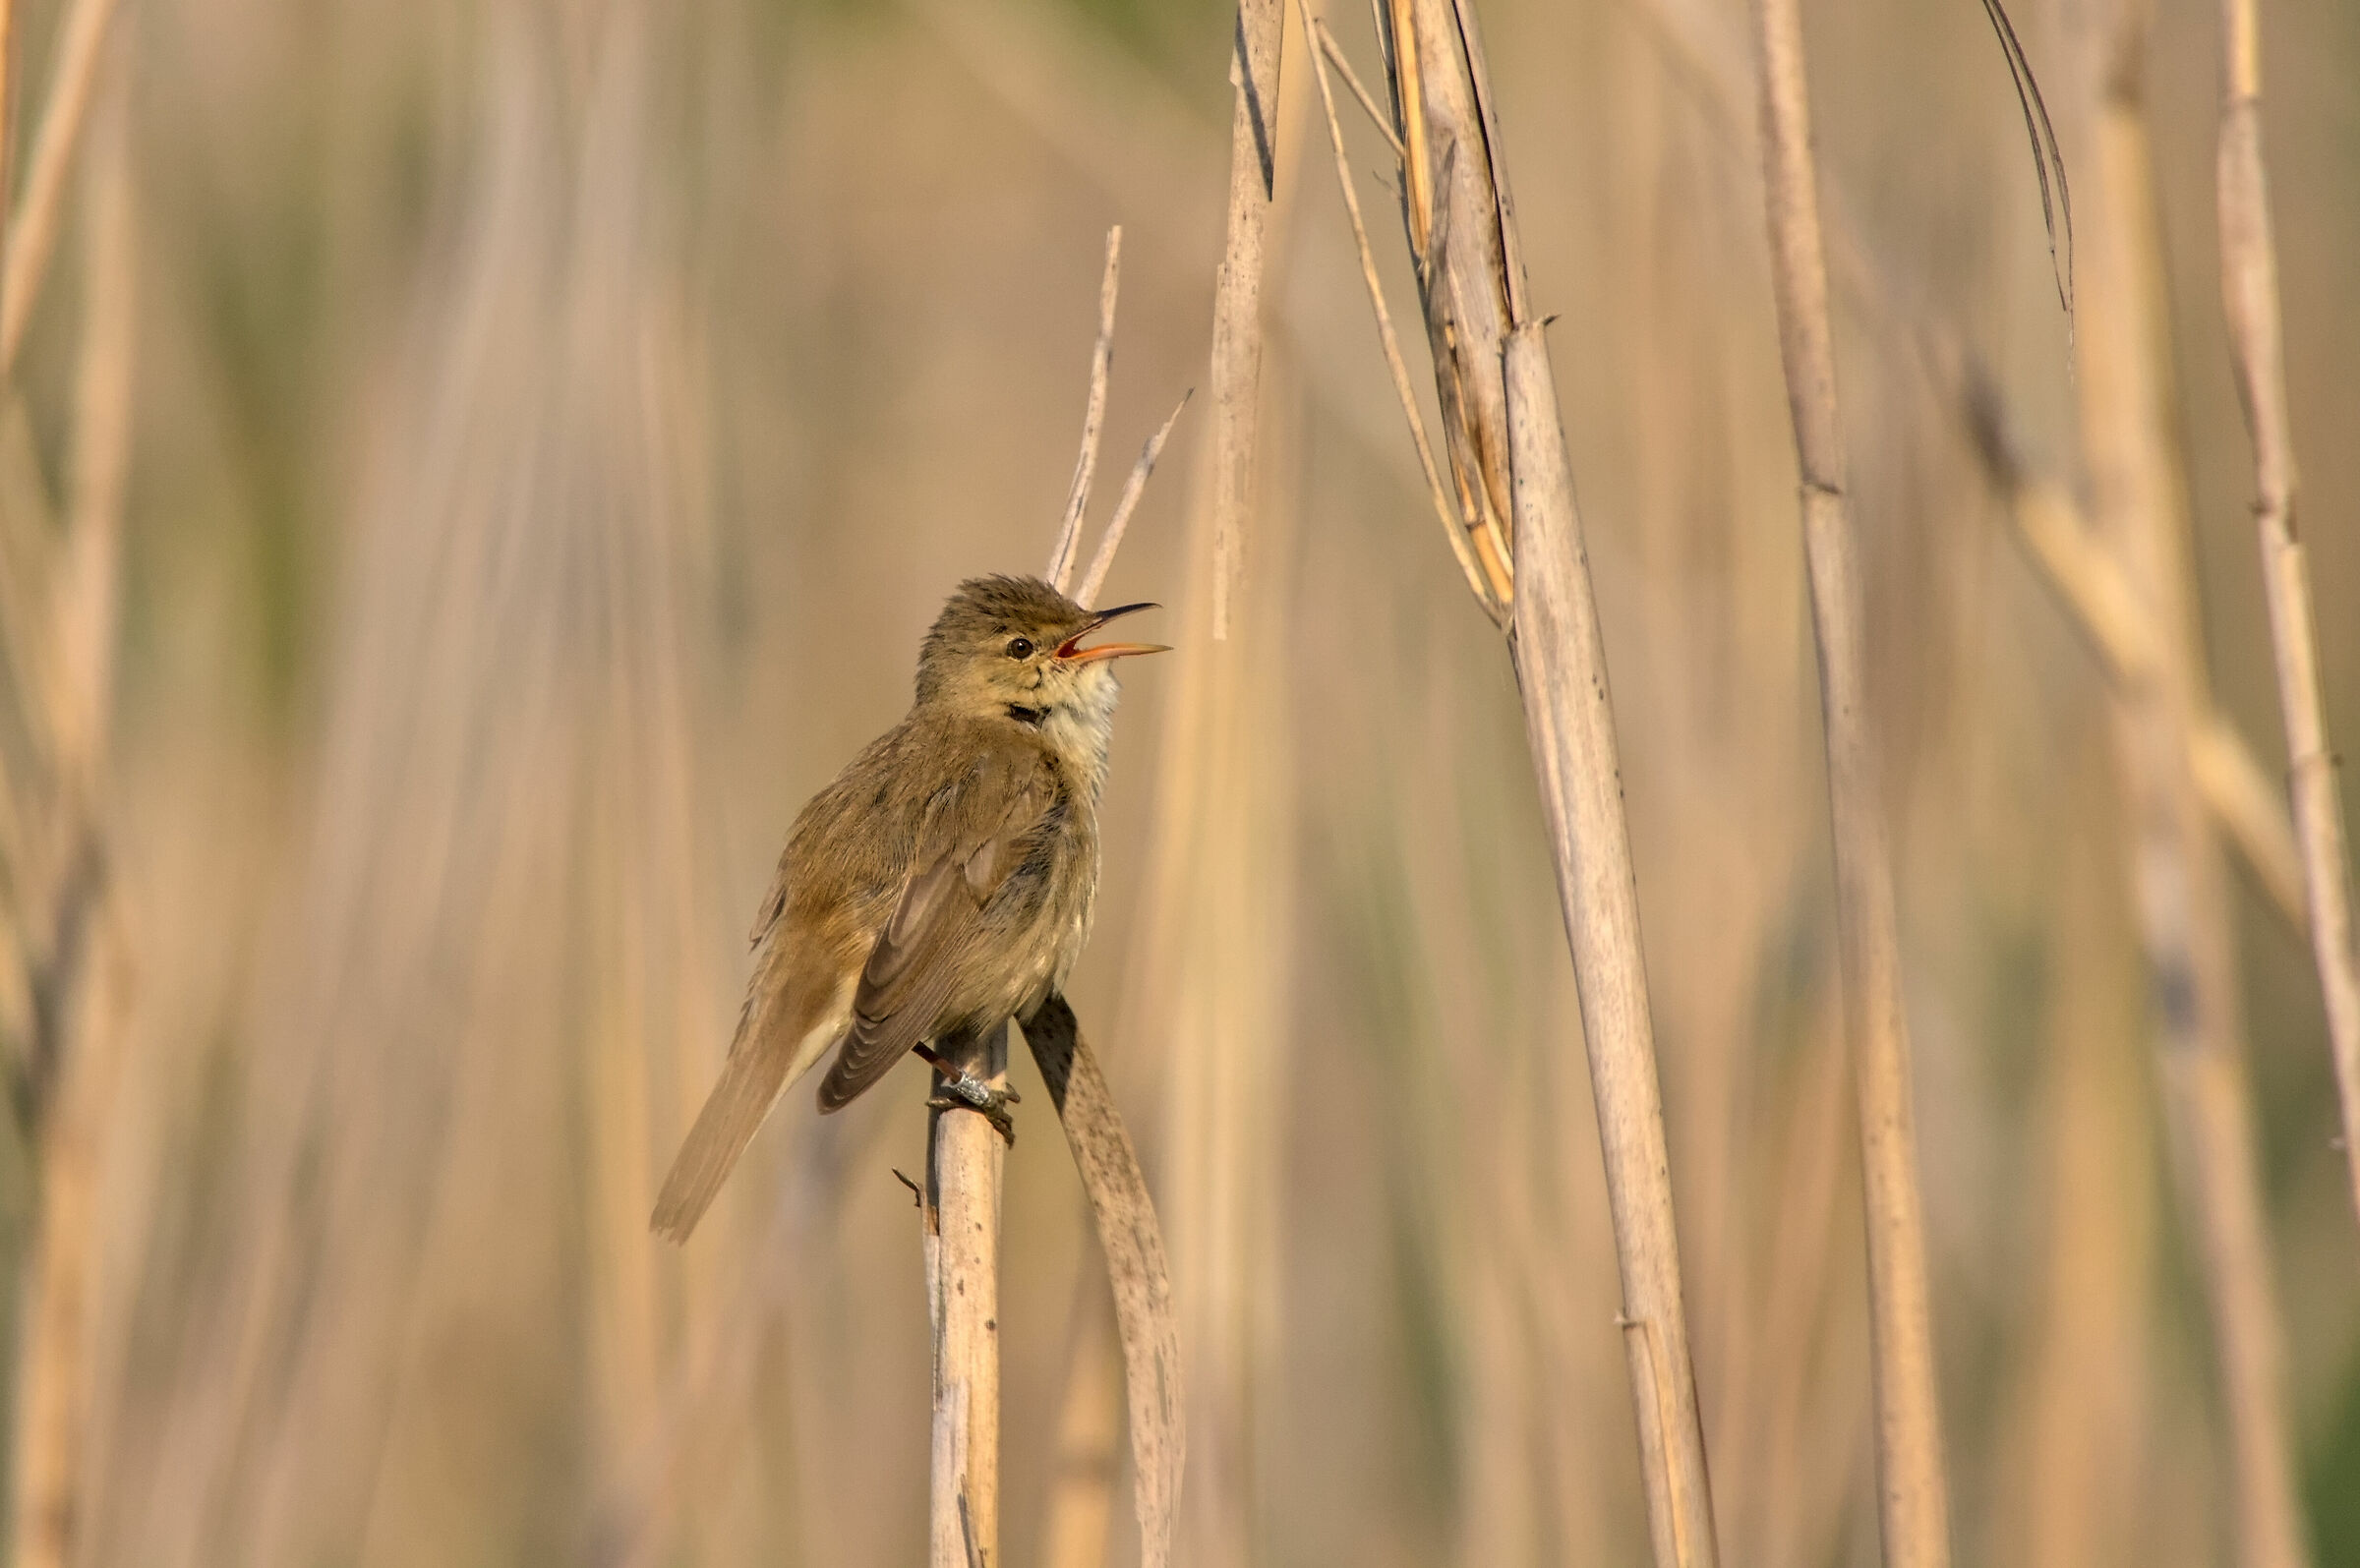 Common reed warbler...